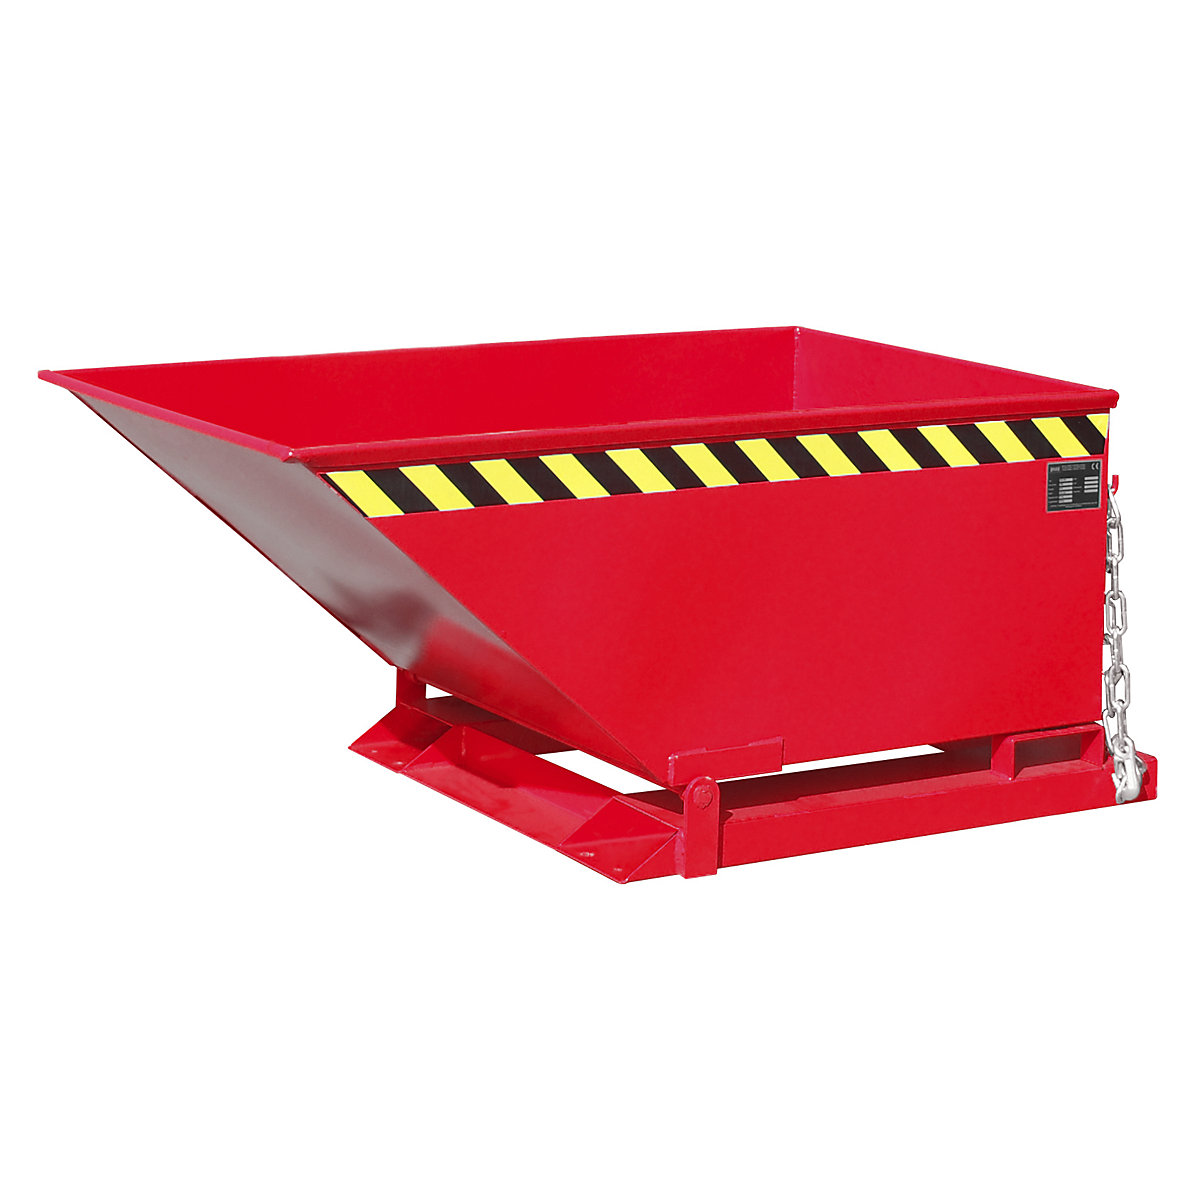 Tilting skip with tilting mechanism – eurokraft pro, low construction, capacity 0.4 m³, red RAL 3000-5